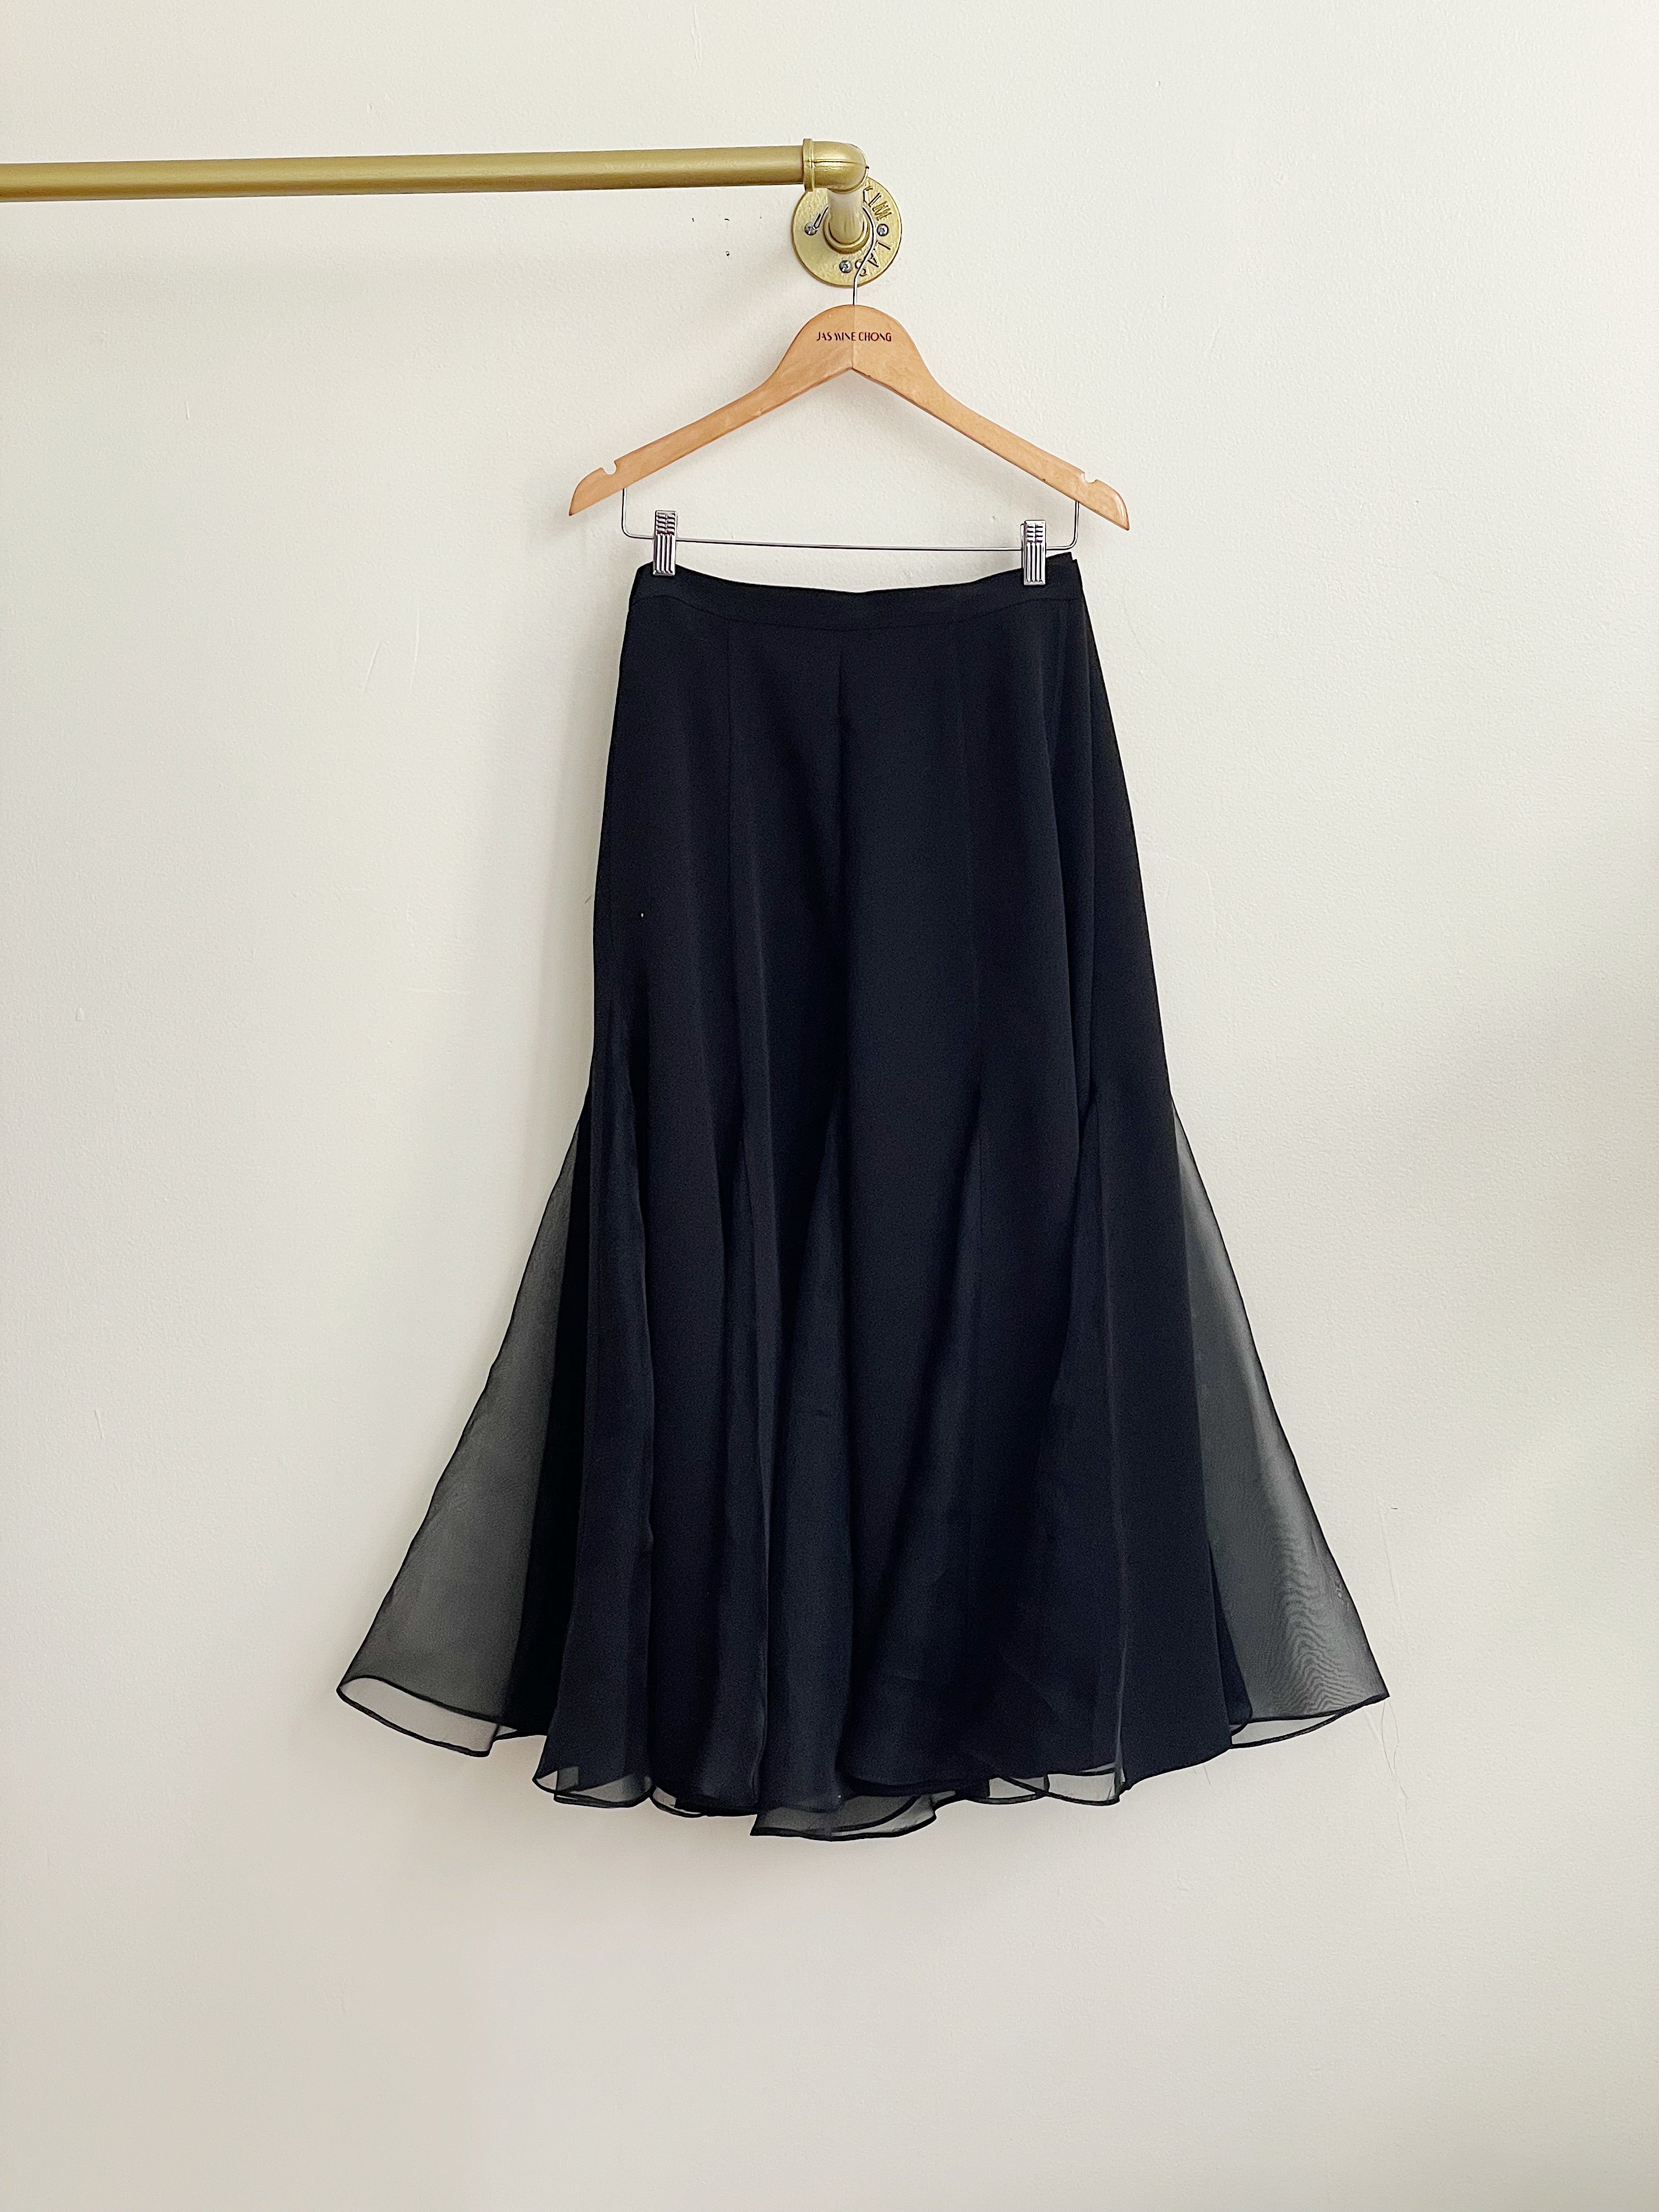 SOMETHINGNEW STYLED BY EMMA FRIDSELL Long skirt with 40% discount! | Vero  Moda®